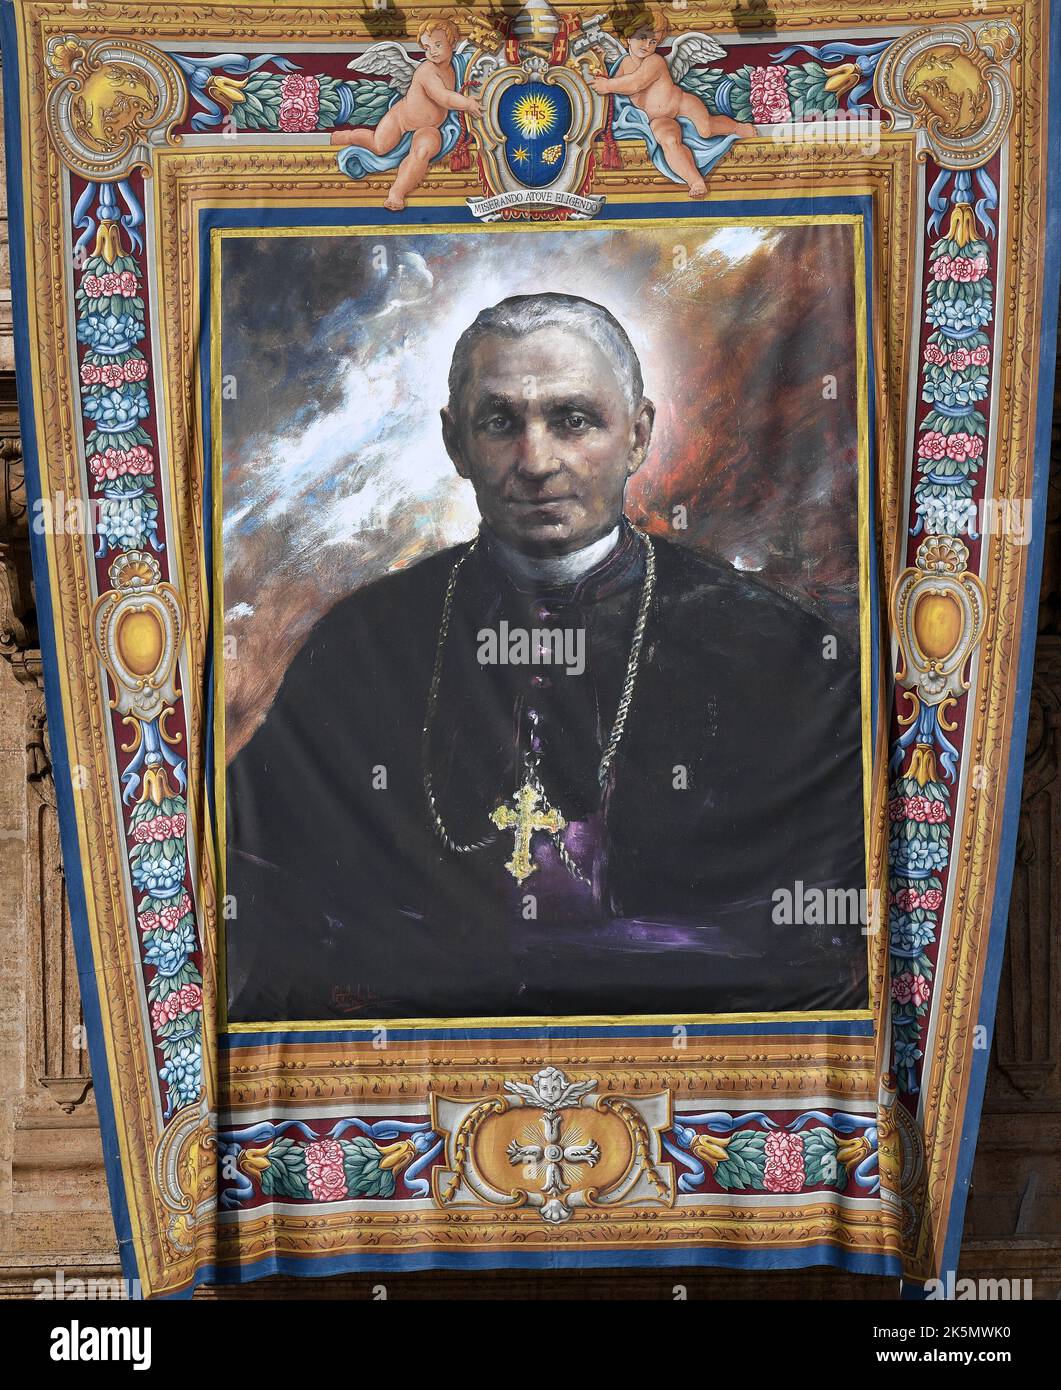 Portrait of new Saint Giovanni Battista Scalabrini (‘Father of the migrants’). Pope Francis presided over the canonization mass of now-Saints Italian Bishop Giovanni Battista Scalabrini and Italian Salesian Brother Artemide Zatti in Saint Peter’s Square, Vatican on October 9, 2022. Both dedicated their lives to a Church that was inclusive and without barriers, as Saint Scalabrini (1839-1905) cared a great deal for migrants and Saint Zatti (1880-1951)cared greatly for the sick. Photo: Eric Vandeville/ABACAPRESS.COM Stock Photo